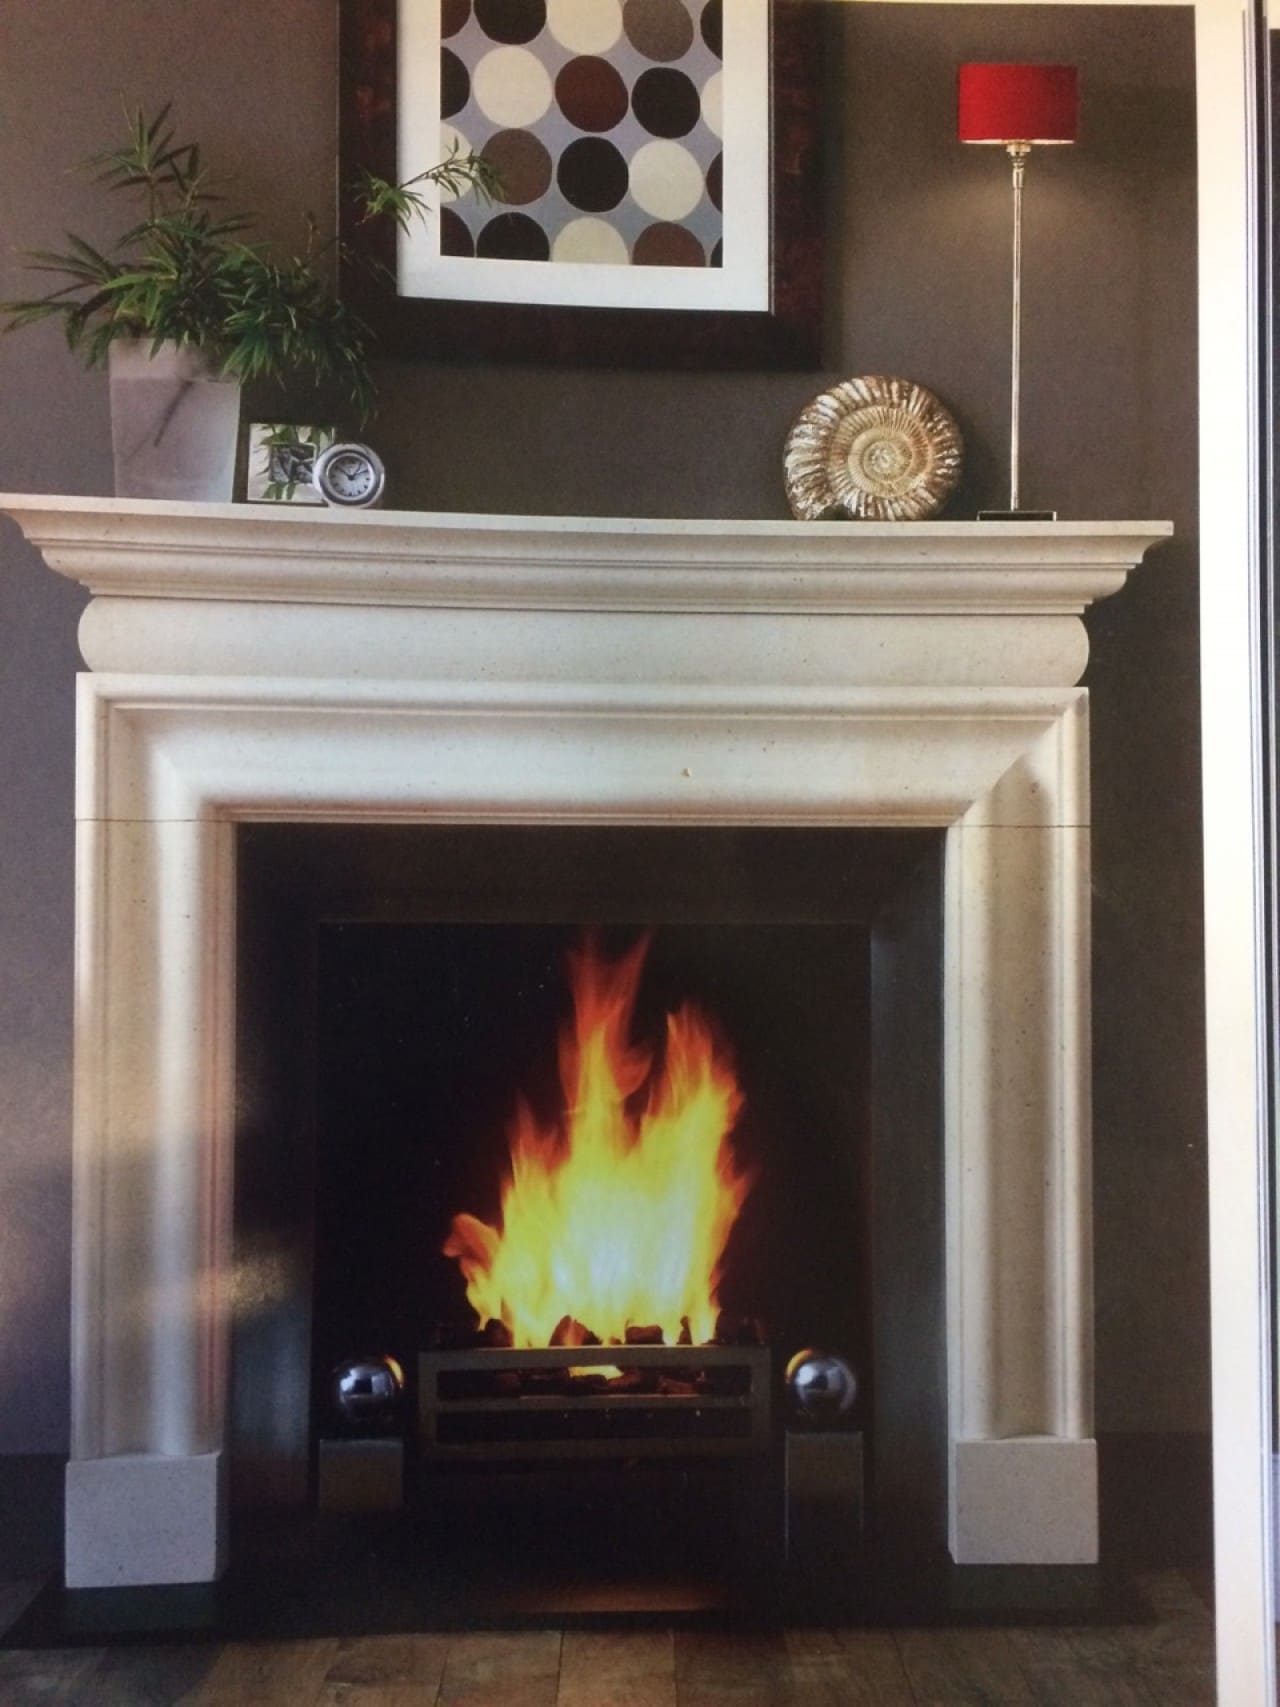 A tile fireplace with a DPD system or a traditional tile fireplace?